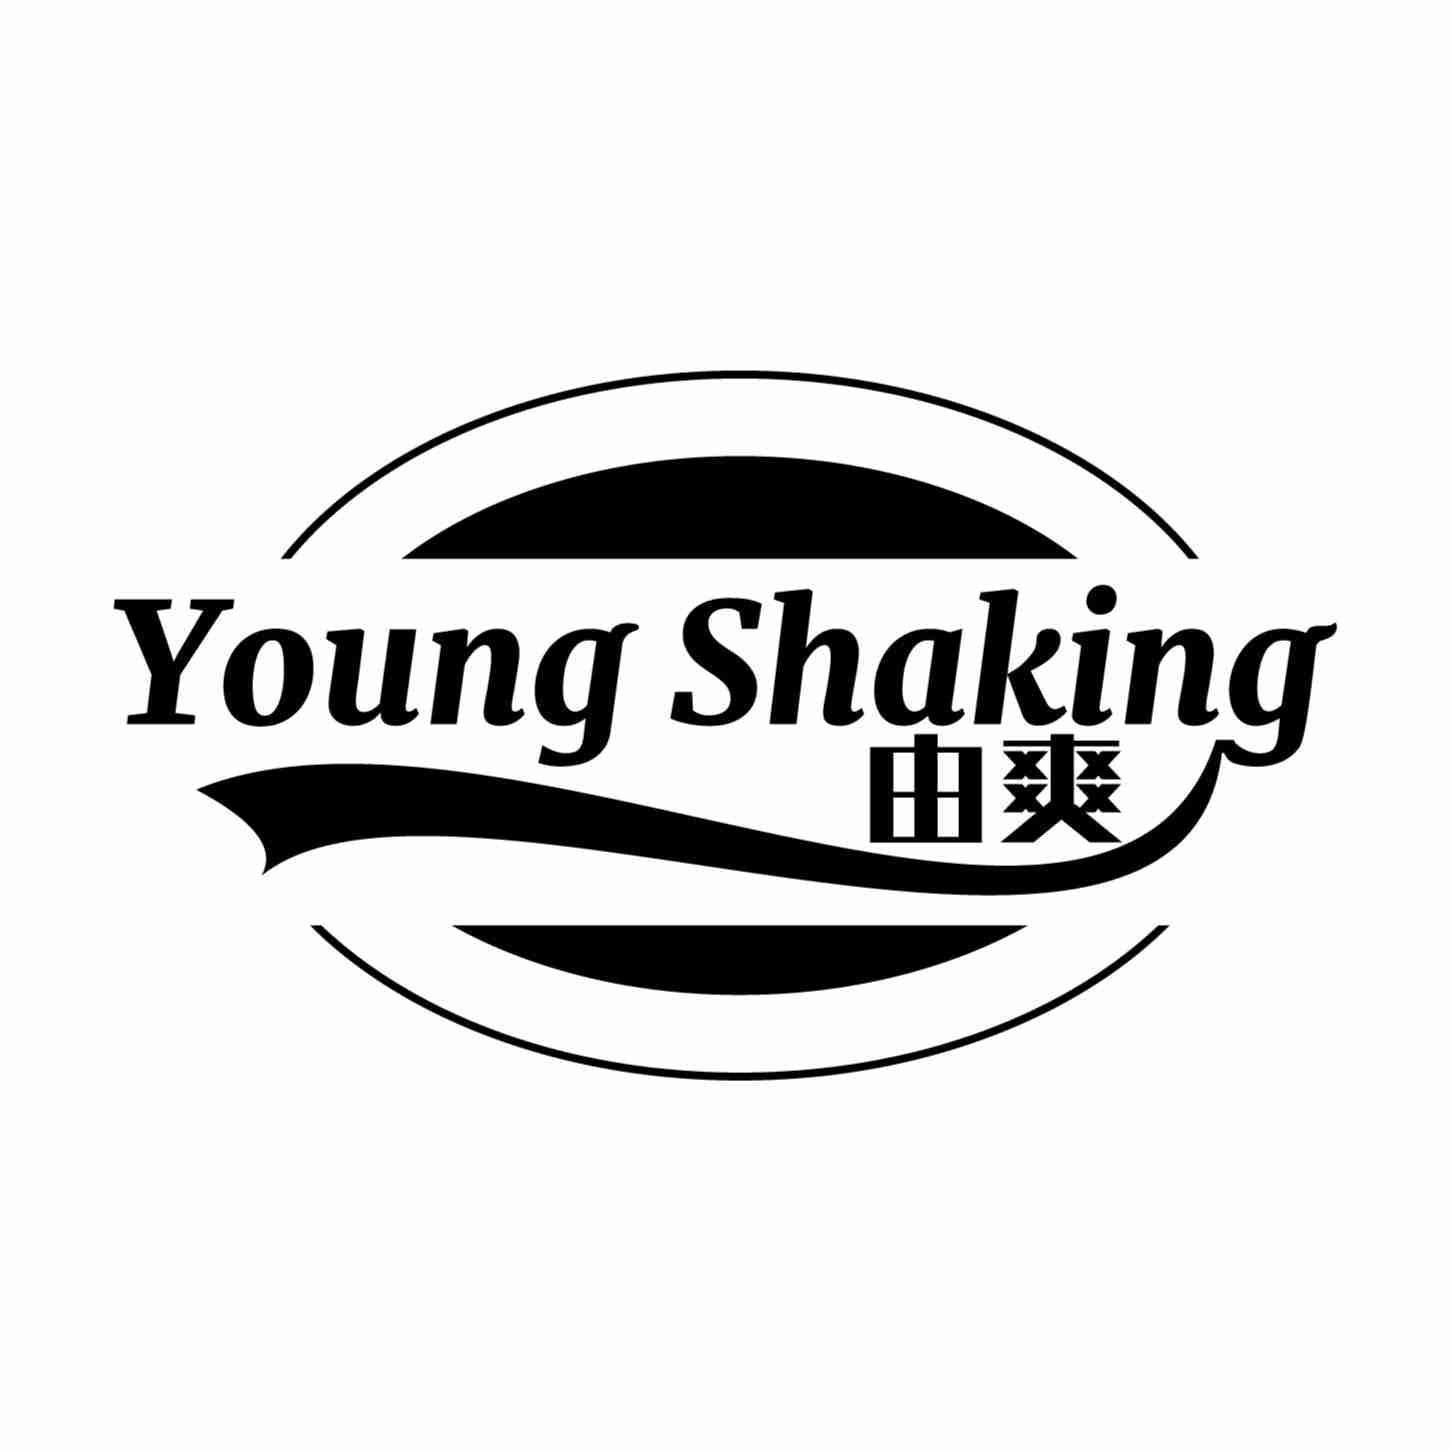 YOUNG SHAKING 由爽